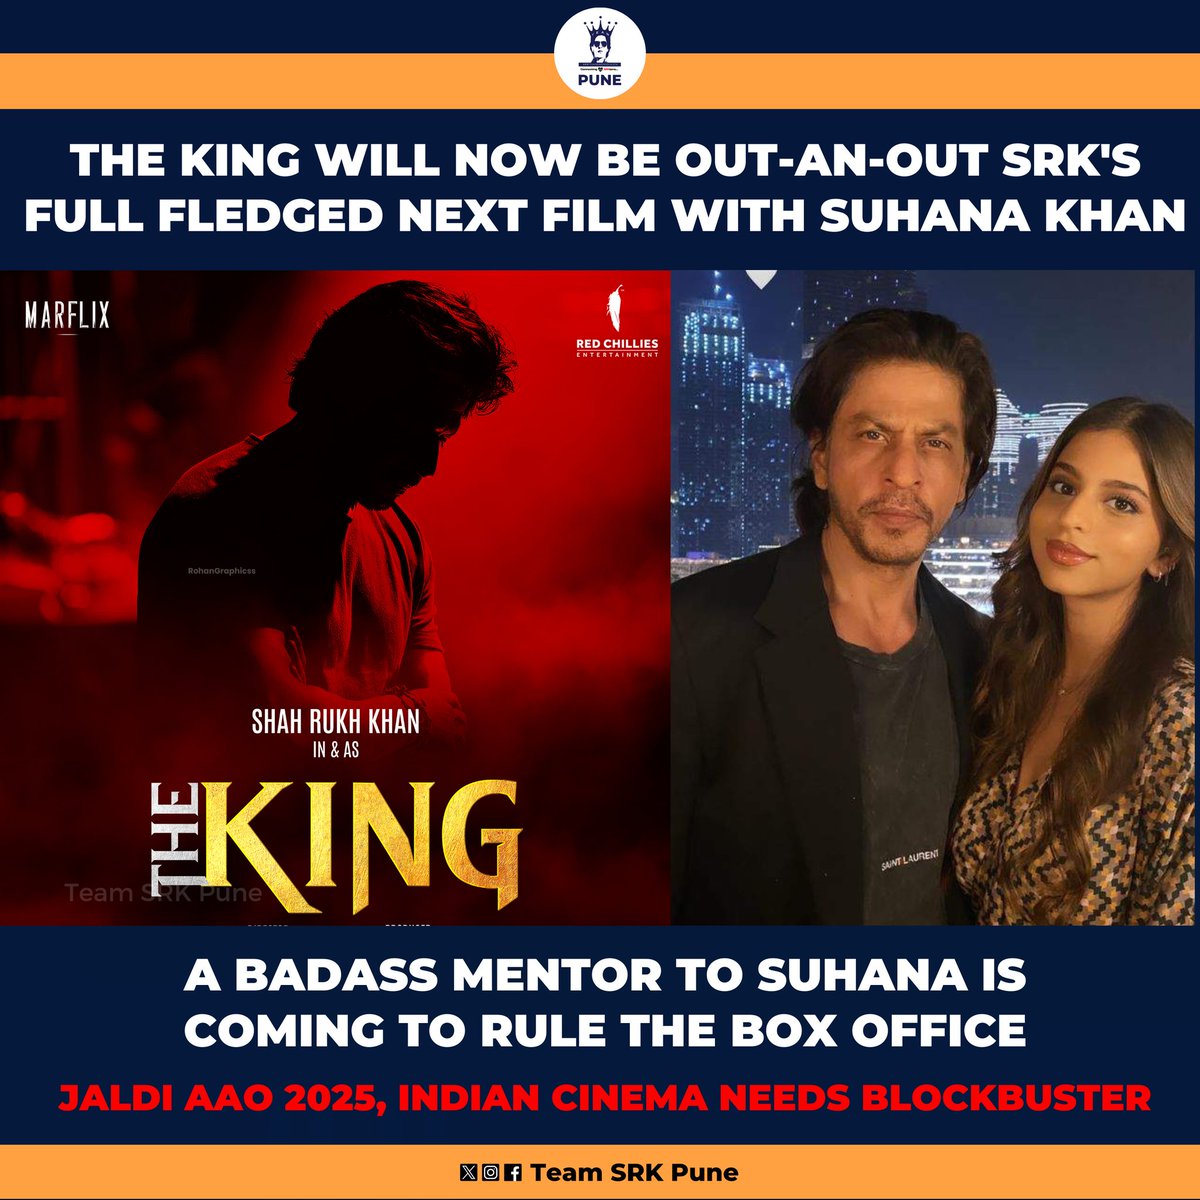 The Blockbuster Indian Cinema needs, SRK's Official next is #TheKing directed by @sujoy_g #ShahRukhKhan #SuhanaKhan #Dubai #ChampionsLeague #Pathaan2 #SiddharthAnand